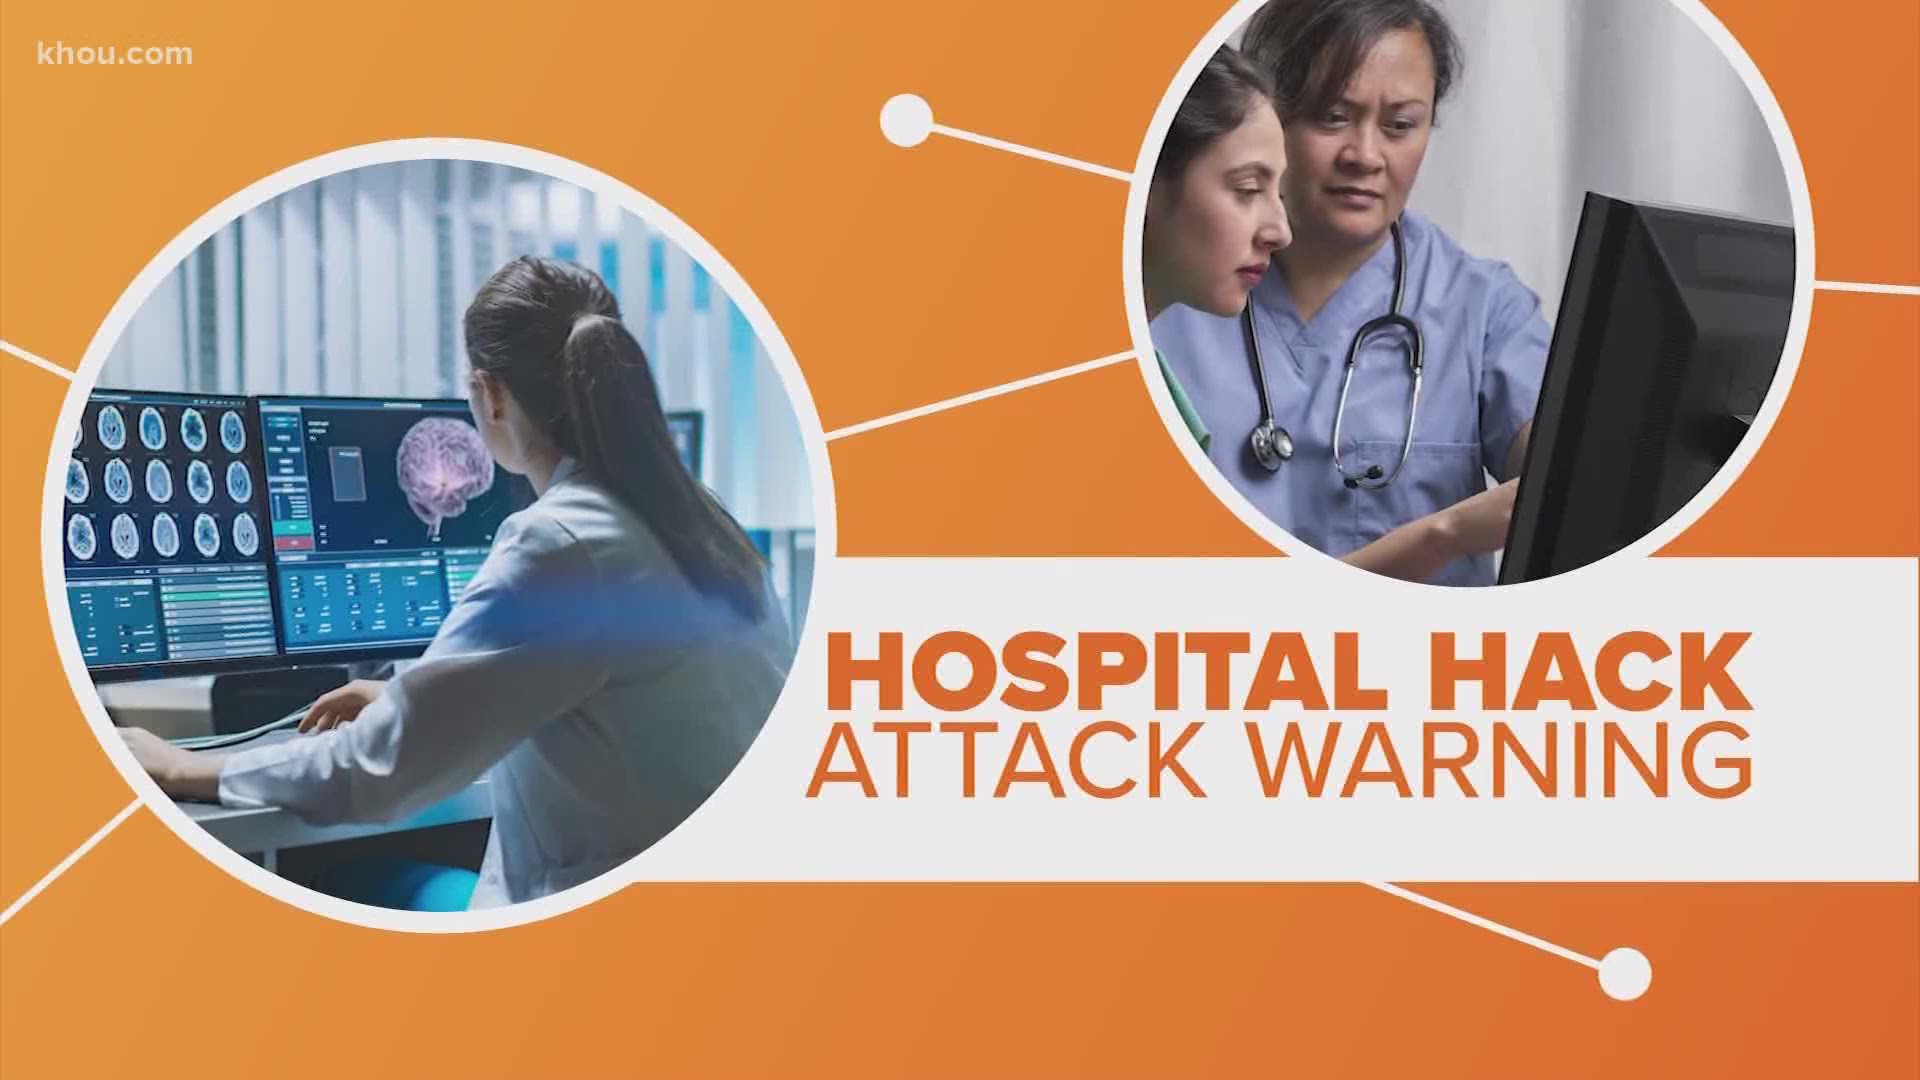 As if American hospitals didn’t have enough to deal with thanks to the recent coronavirus surge… now the FBI is warning hackers are targeting medical institutions.